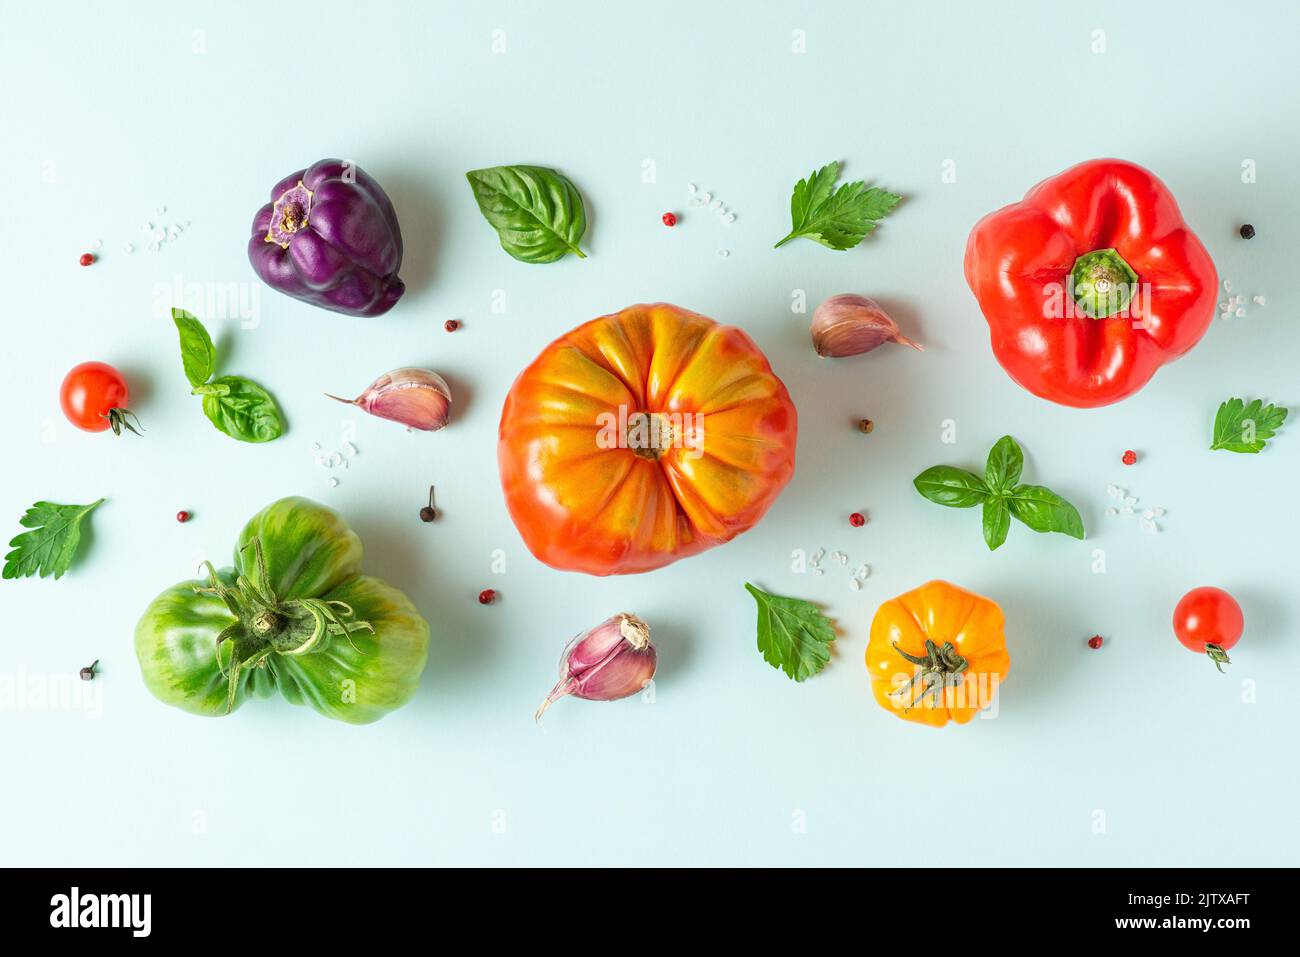 Creative layout made of tomatoes, pepper, garlic, basil leaves. Flat lay. Top view. Food composition. Vegetables on blue background. Food ingredient p Stock Photo